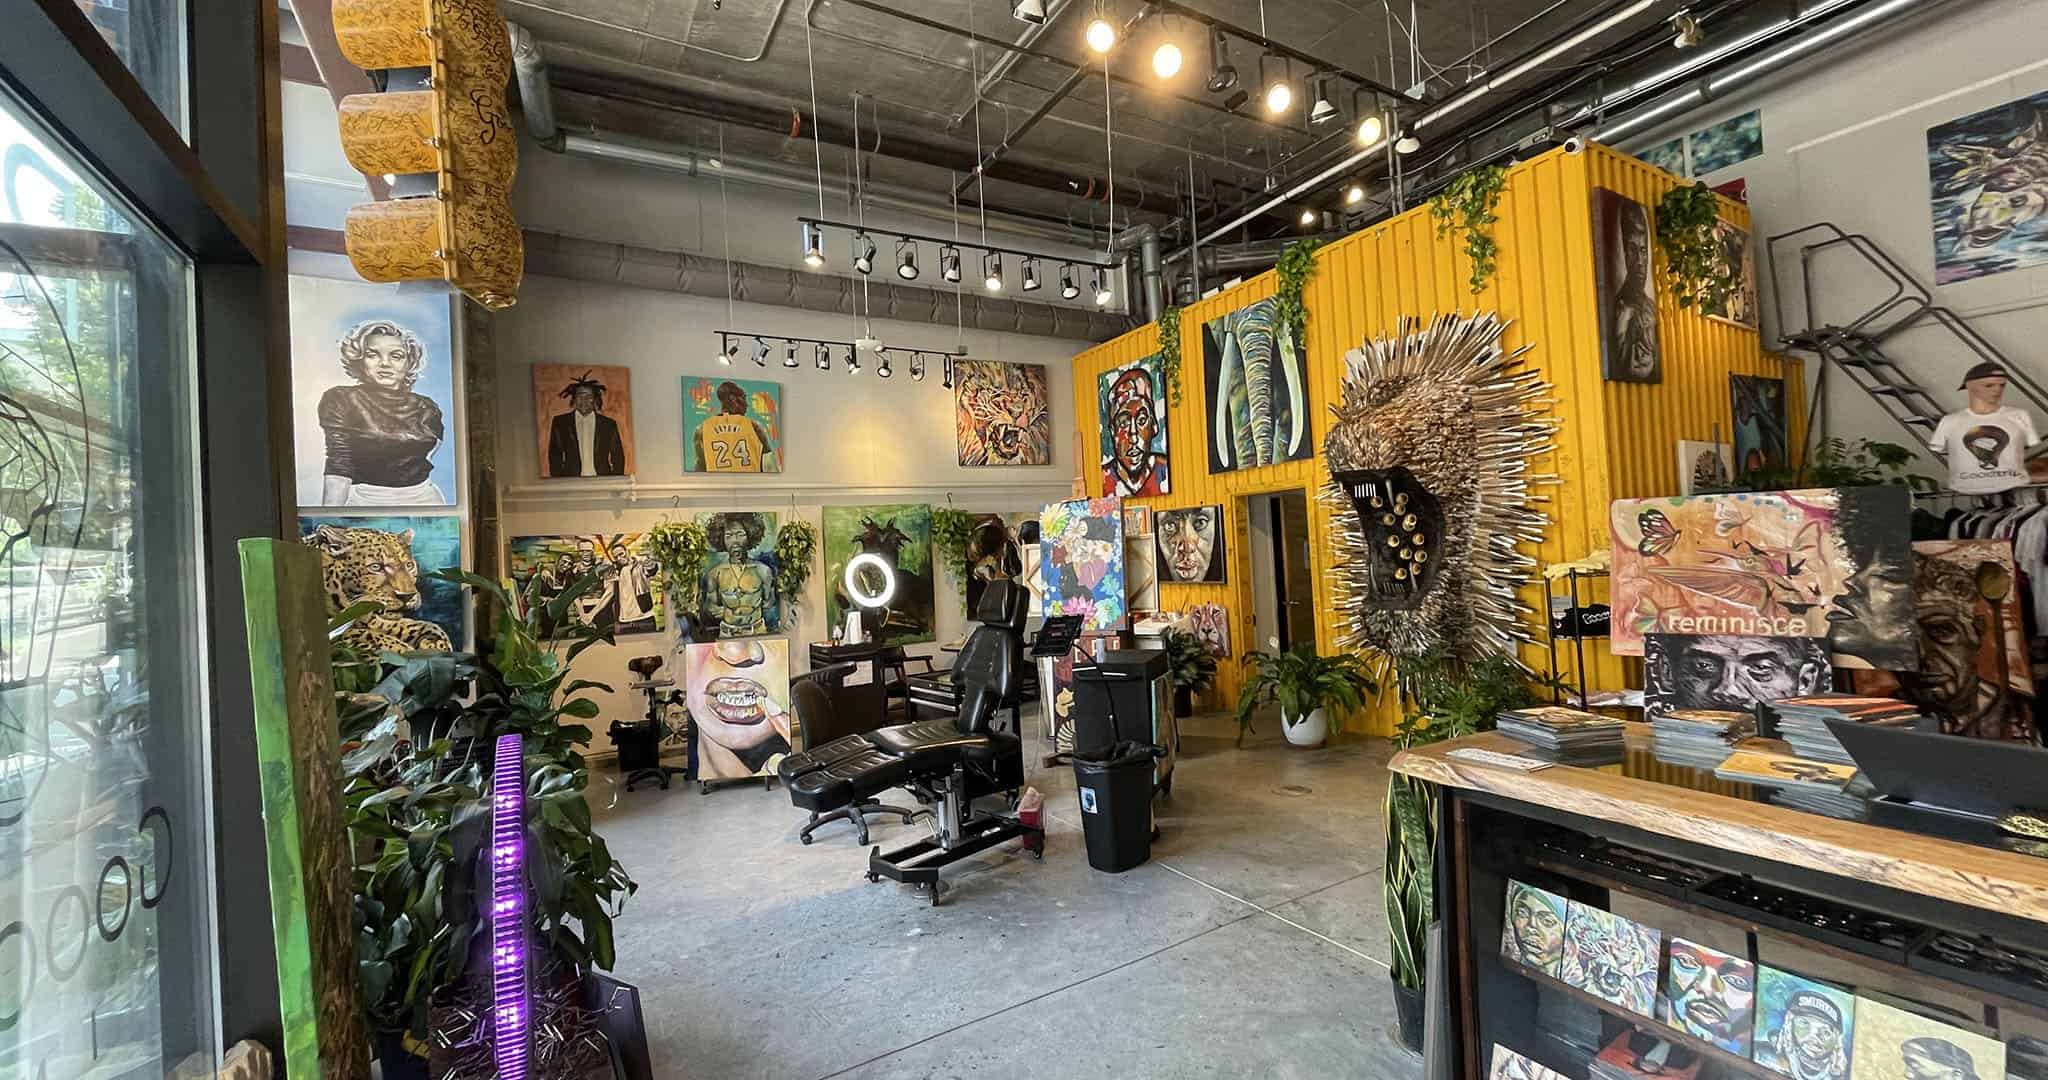 Shop for Art + Get a Tattoo at DTR's Good Trip Gallery